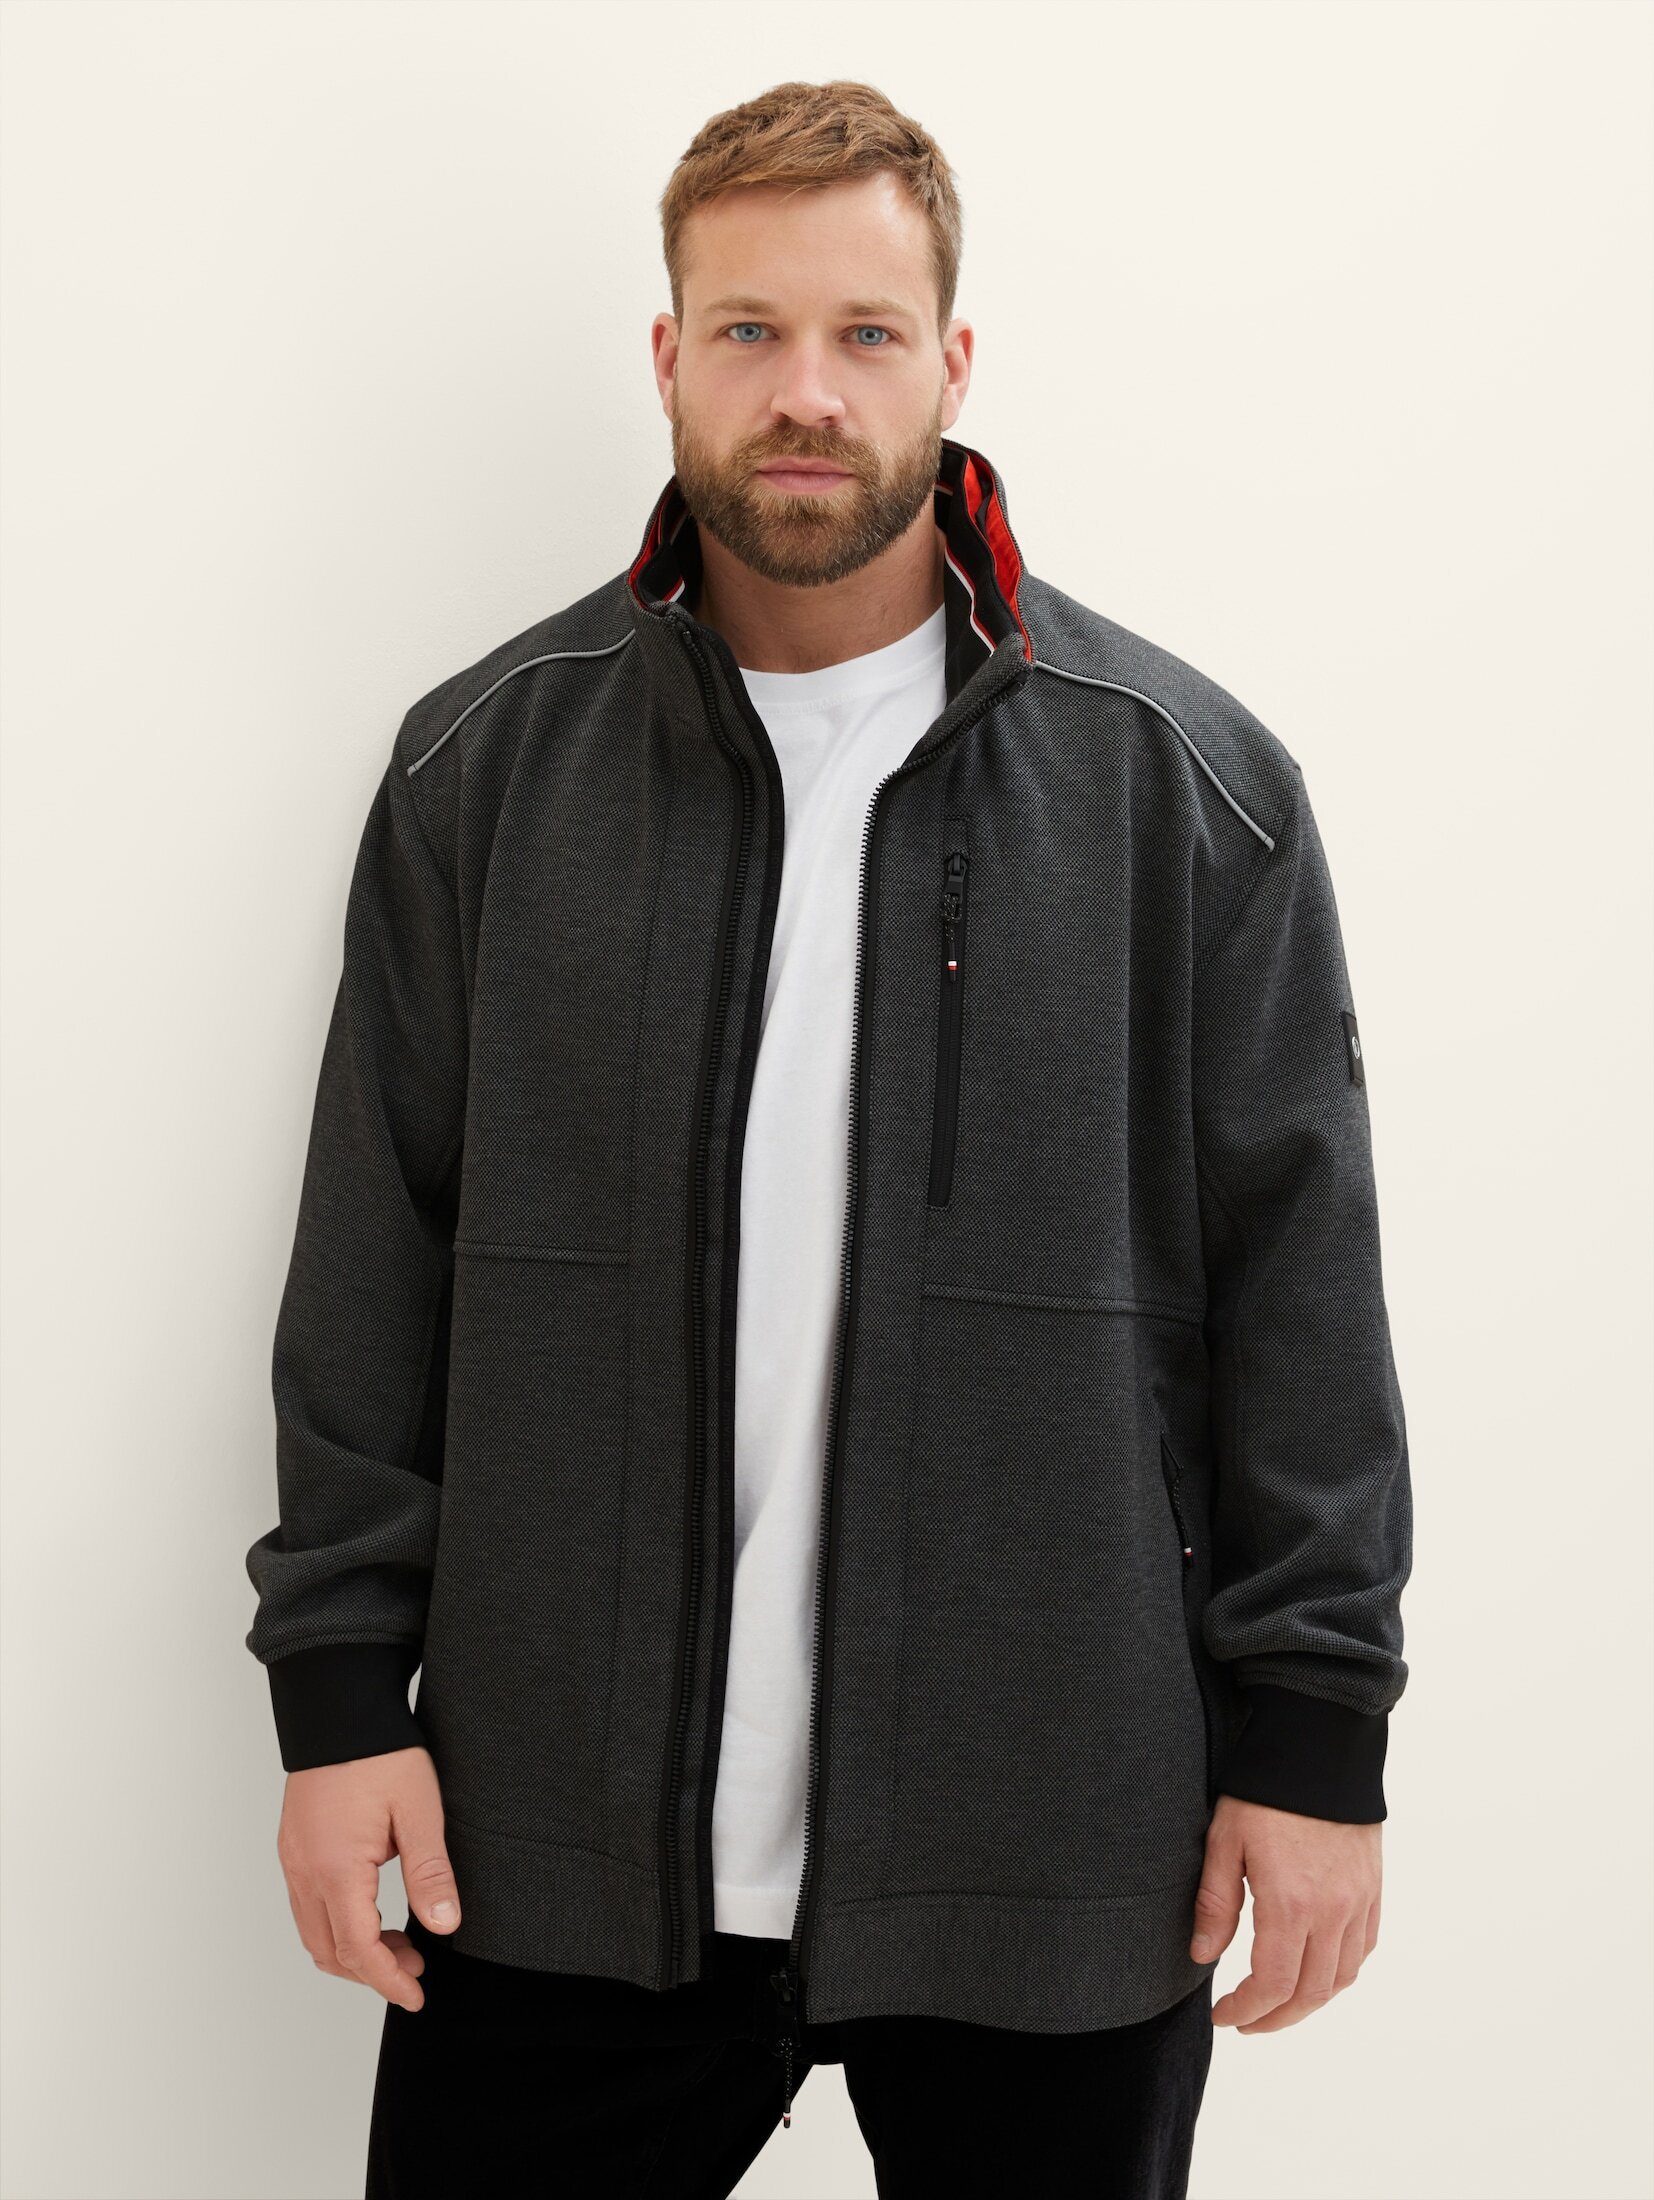 structure verdeckter Jacke - TOM Blouson Plus Kapuze TAILOR mit anthracite knitted PLUS